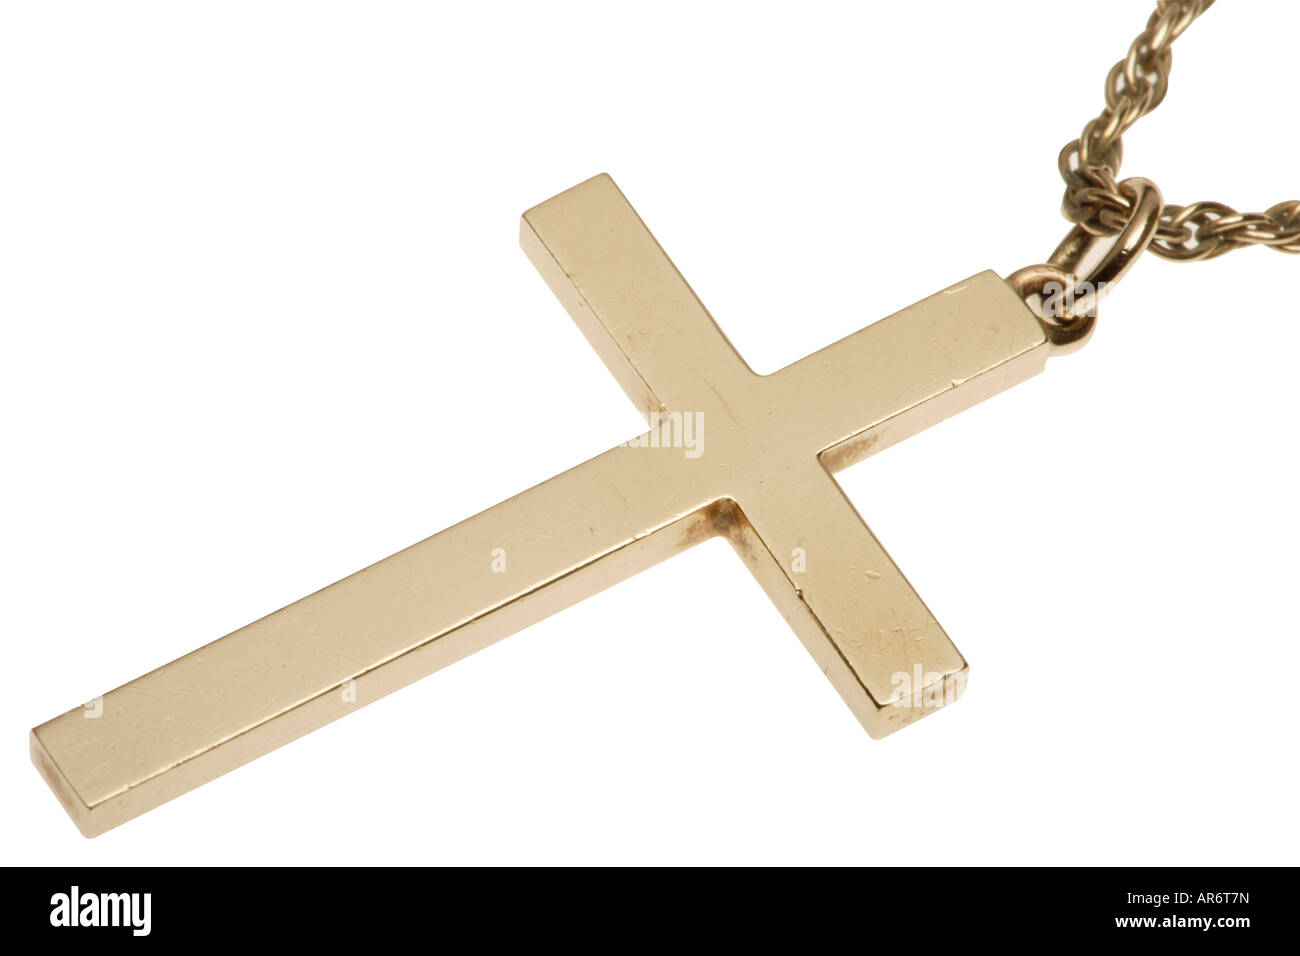 Gold Cross and chain necklace Stock Photo